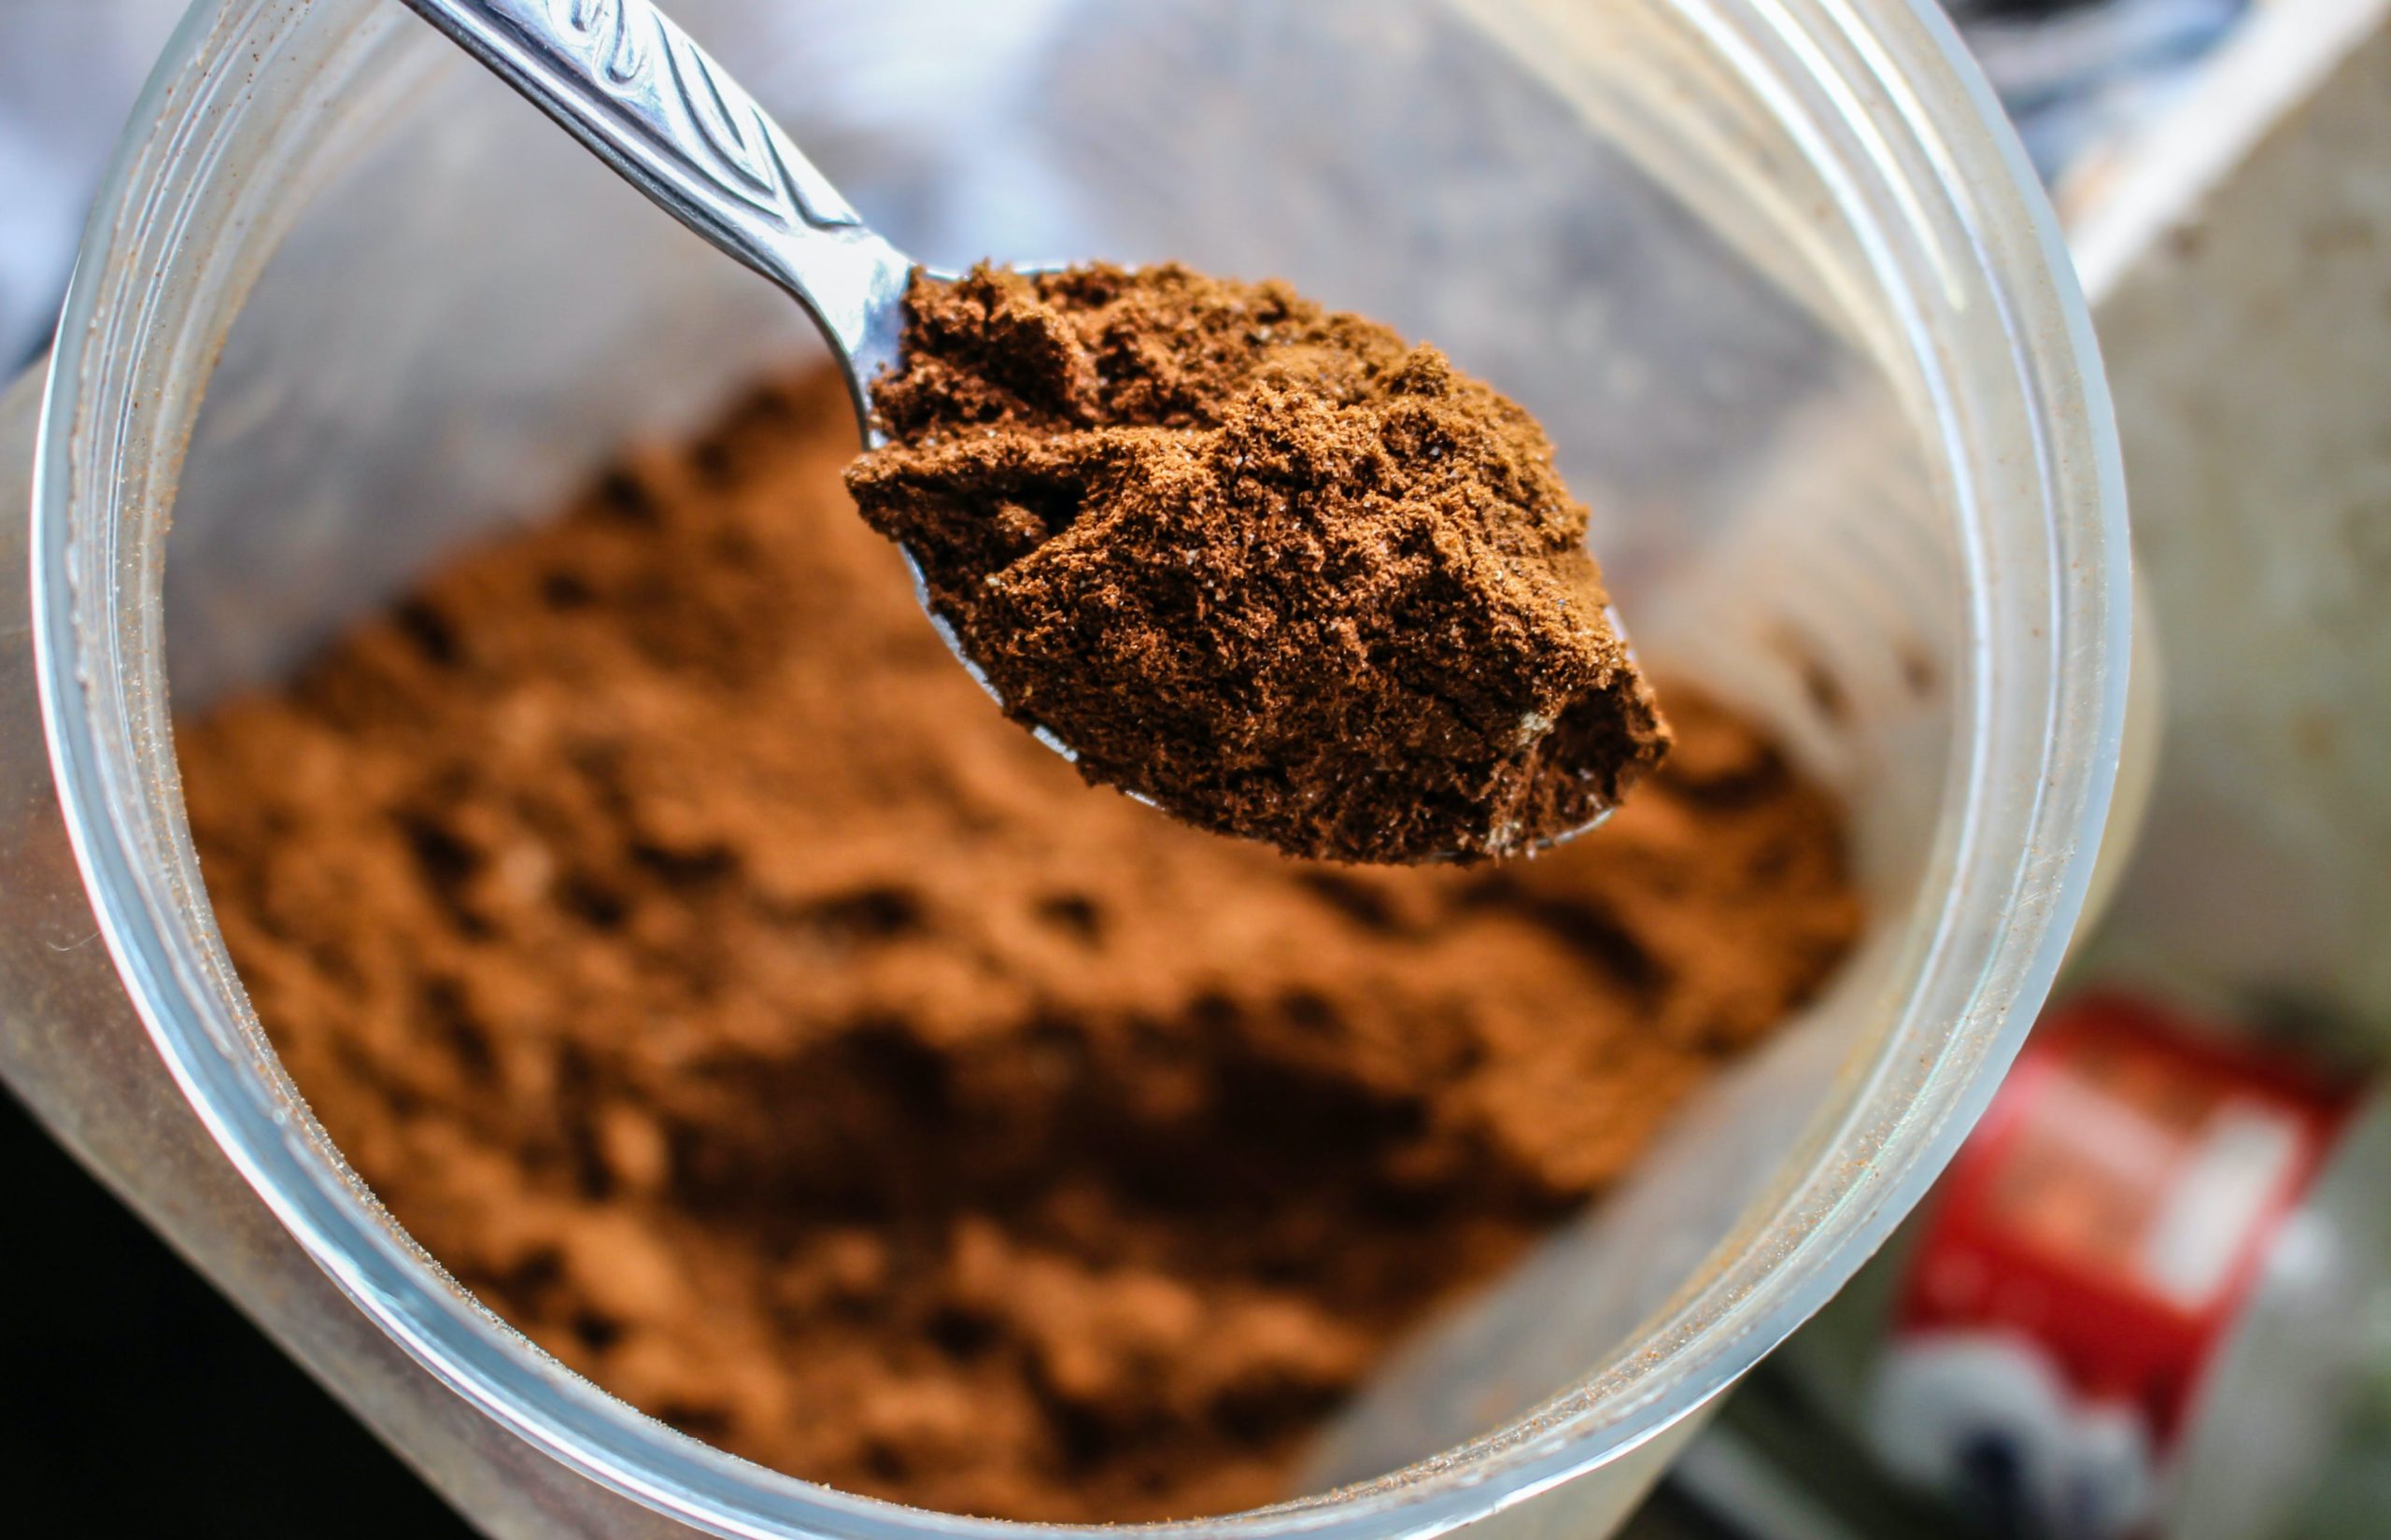 A chocolate protein powder in a spoon